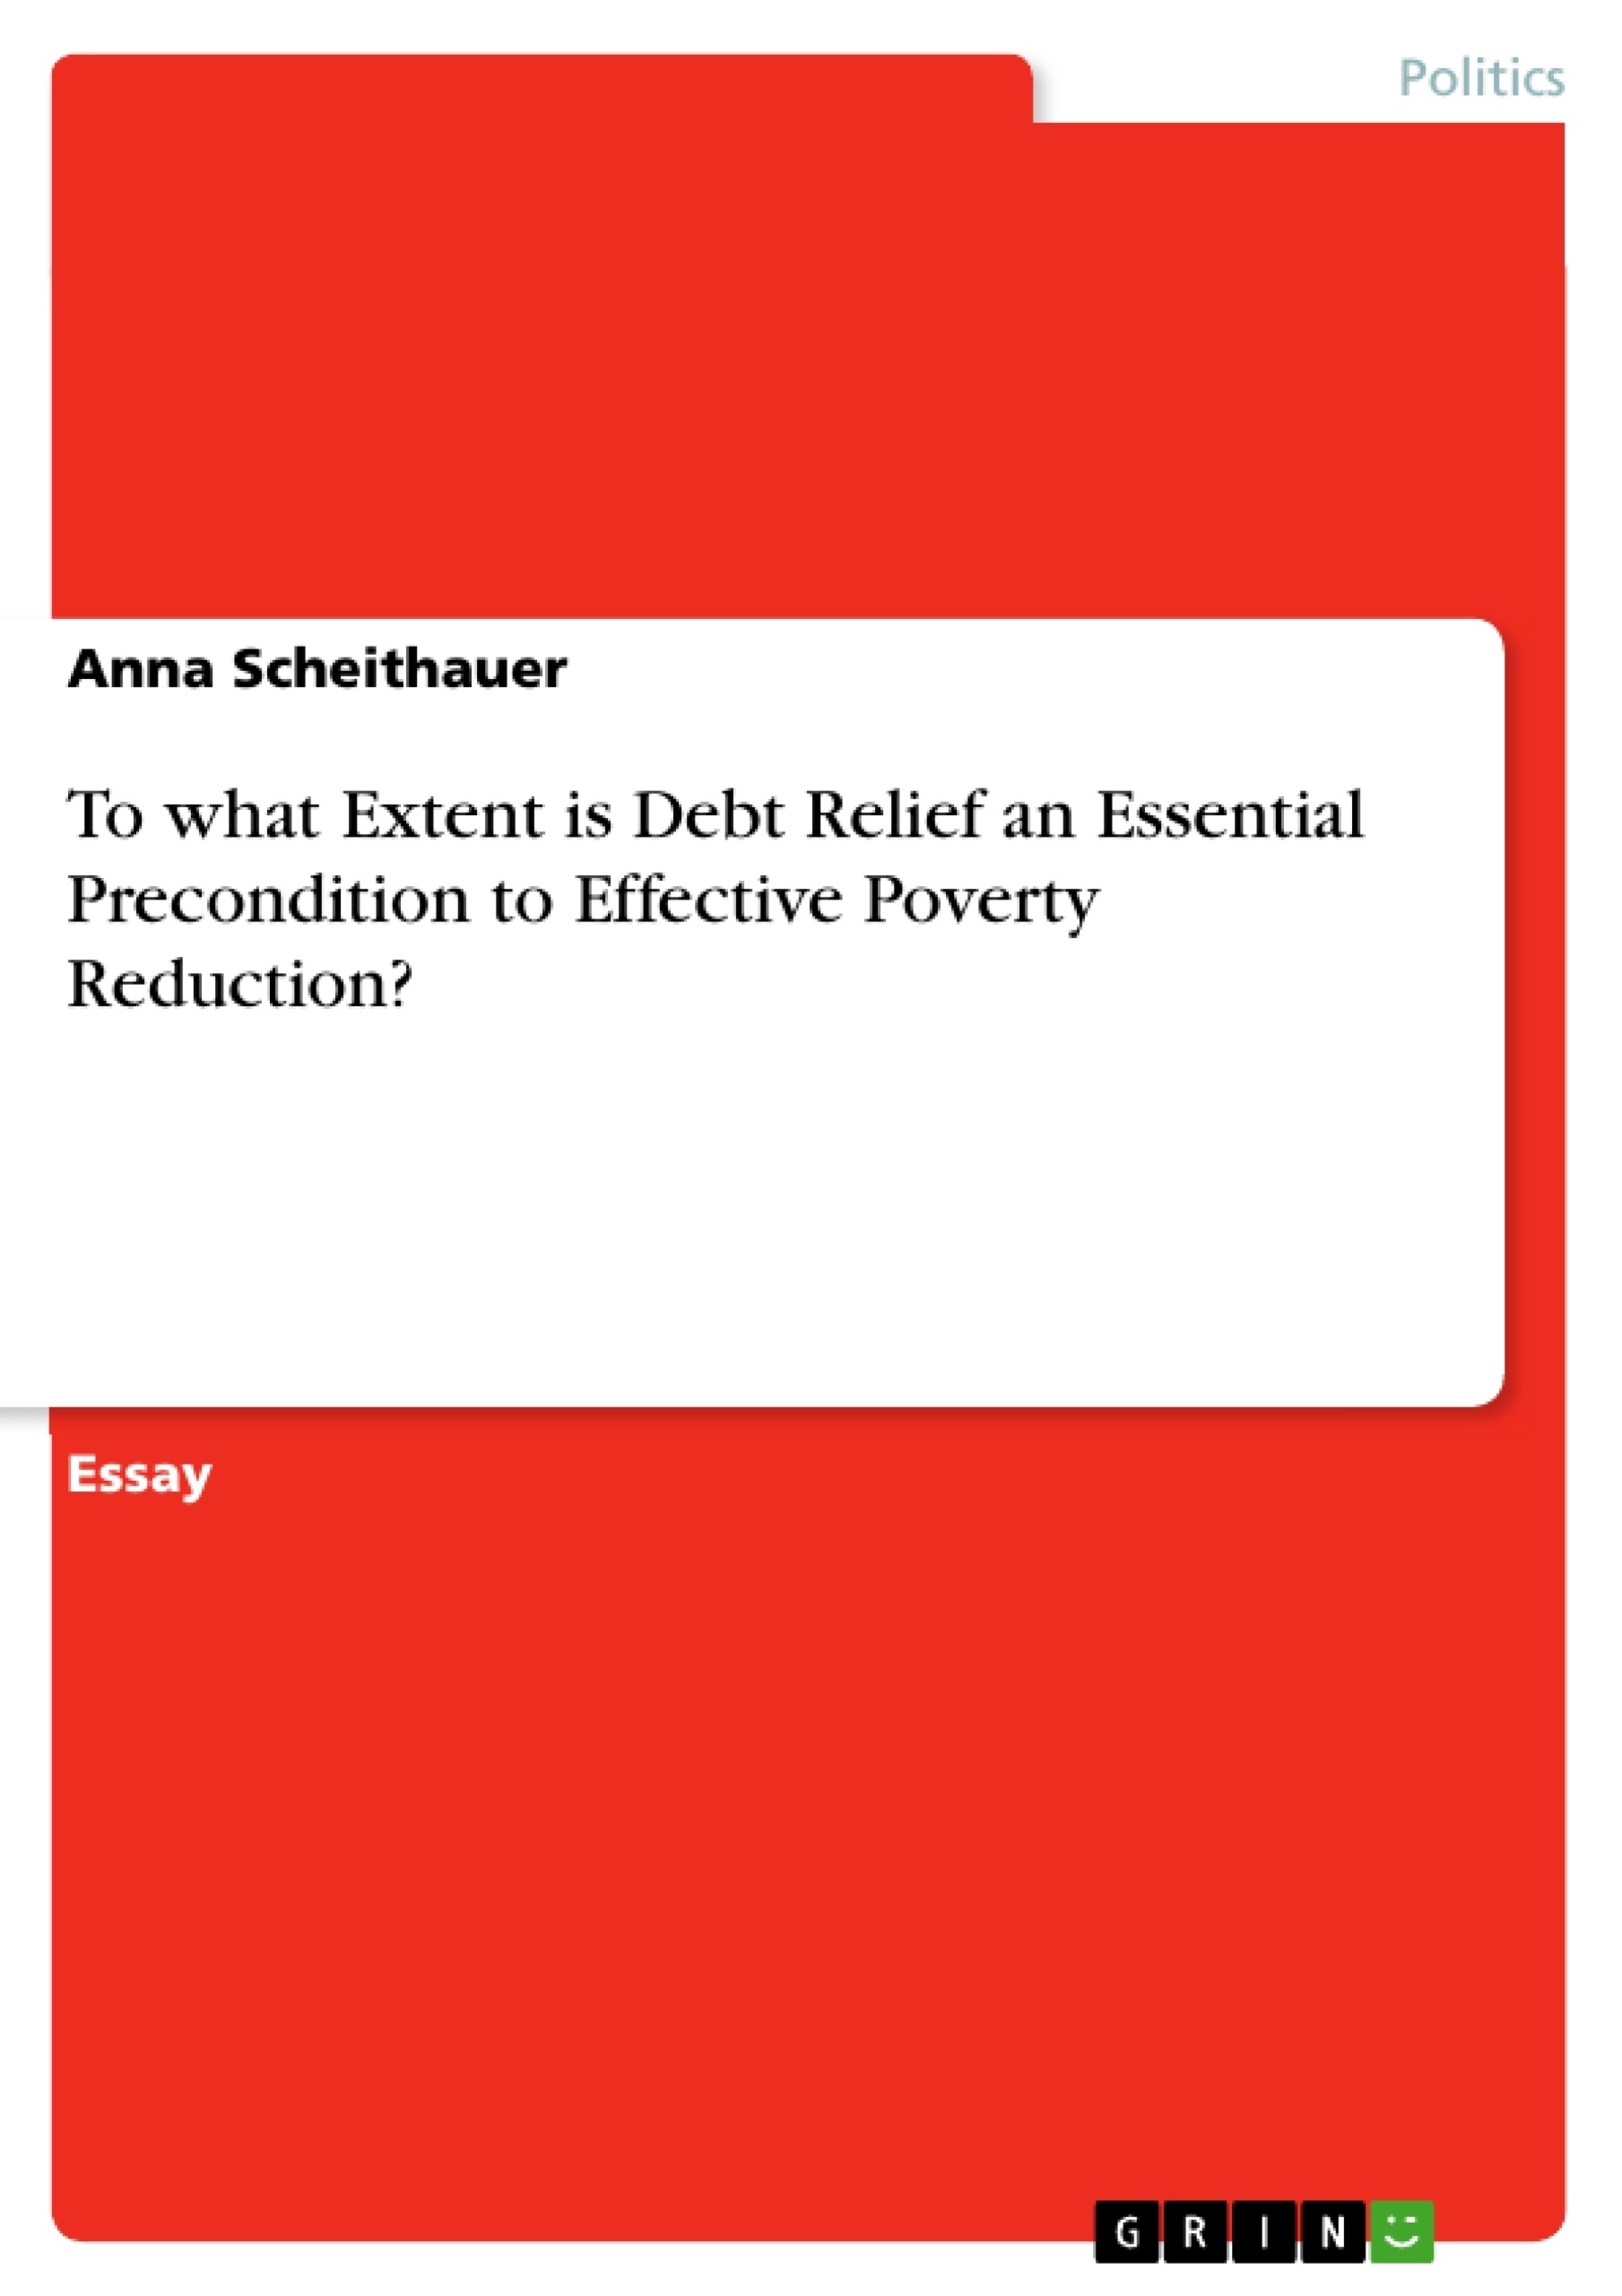 Title: To what Extent is Debt Relief an Essential Precondition to Effective Poverty Reduction?